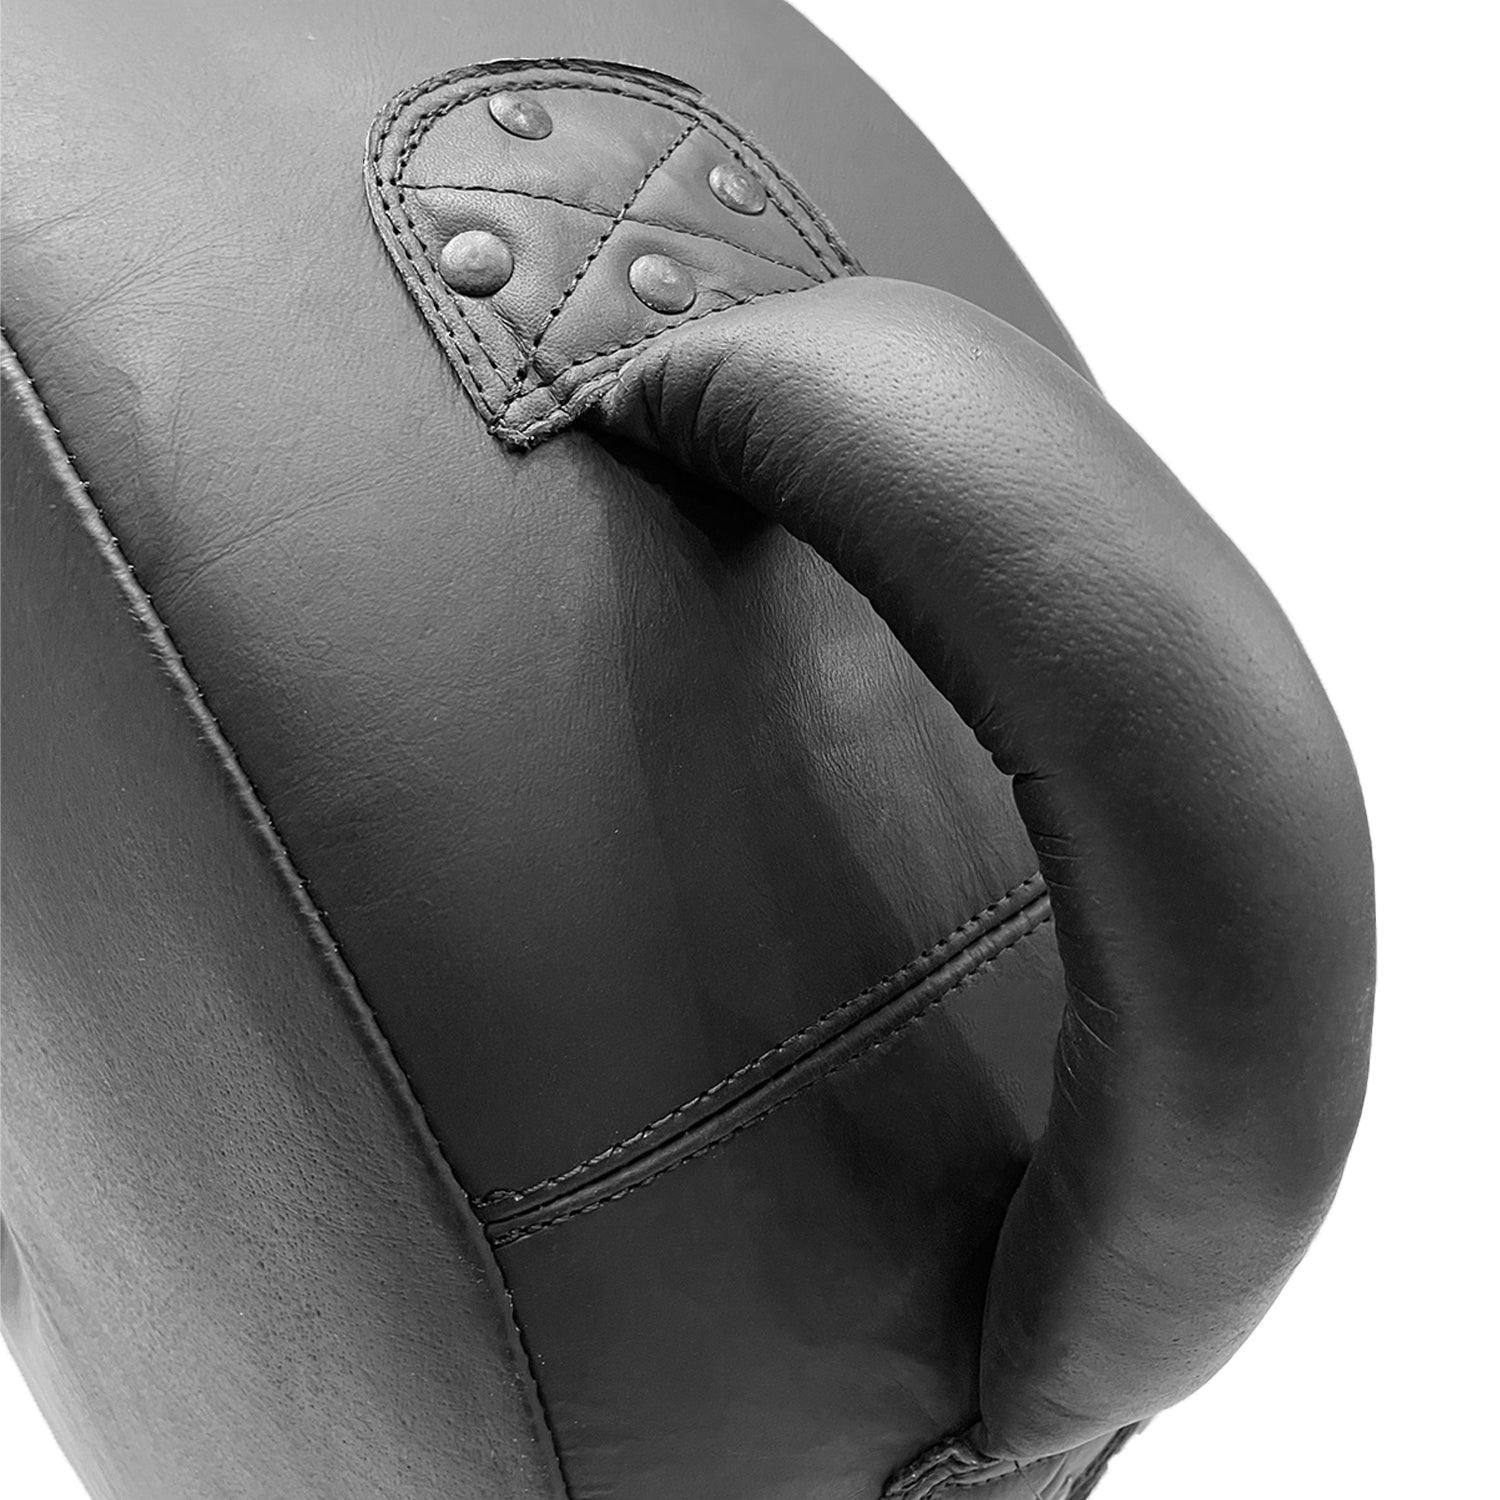 RingMaster Sports Round Punch Kick Shield Large Genuine Leather Black - RINGMASTER SPORTS - Made For Champions